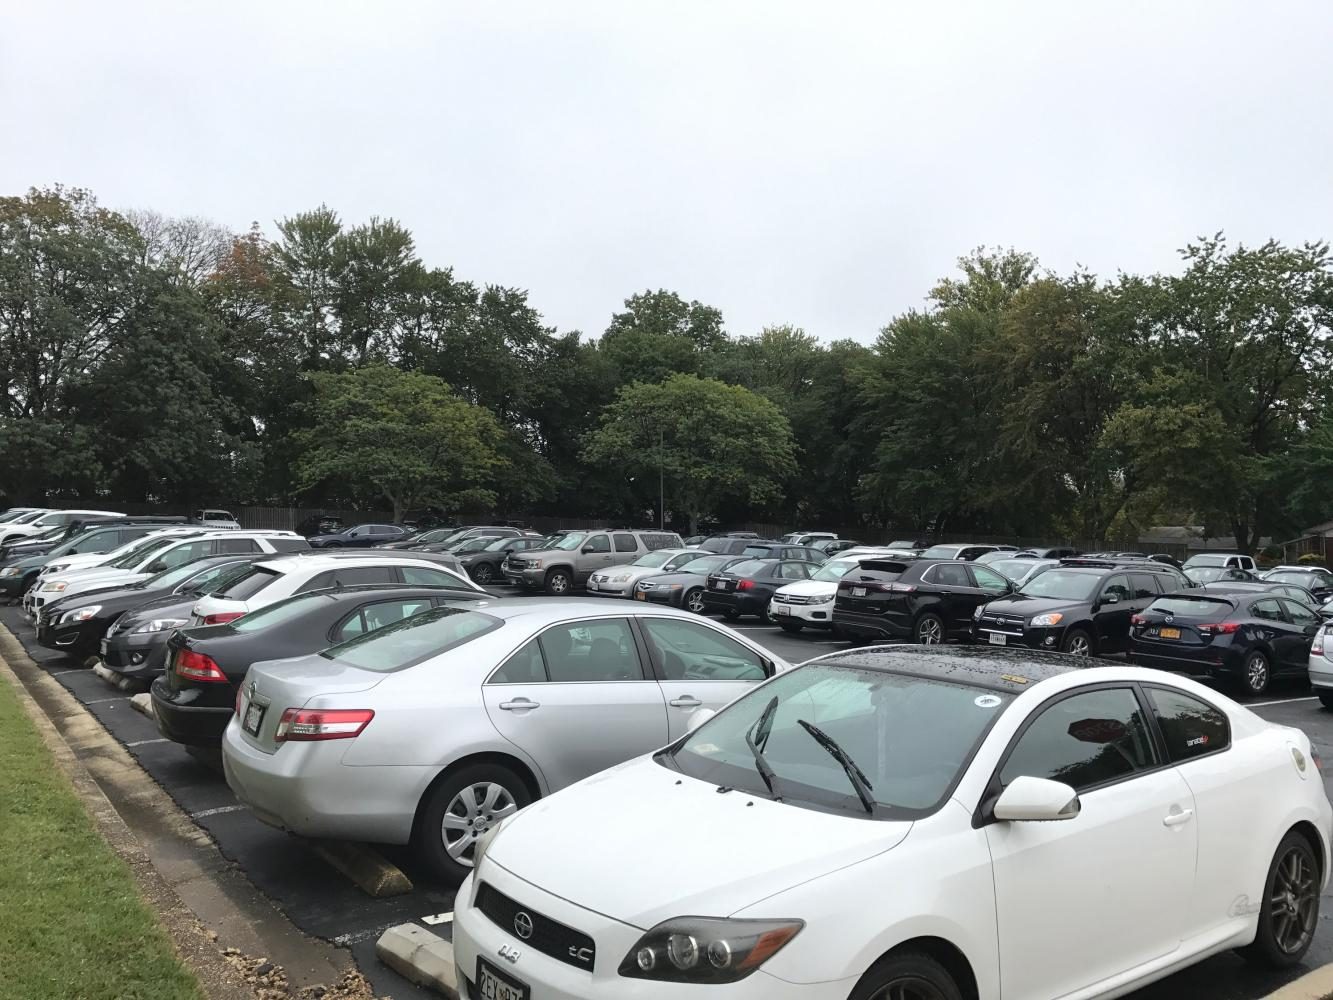 The break-in occurred in the CESJDS parking lot.